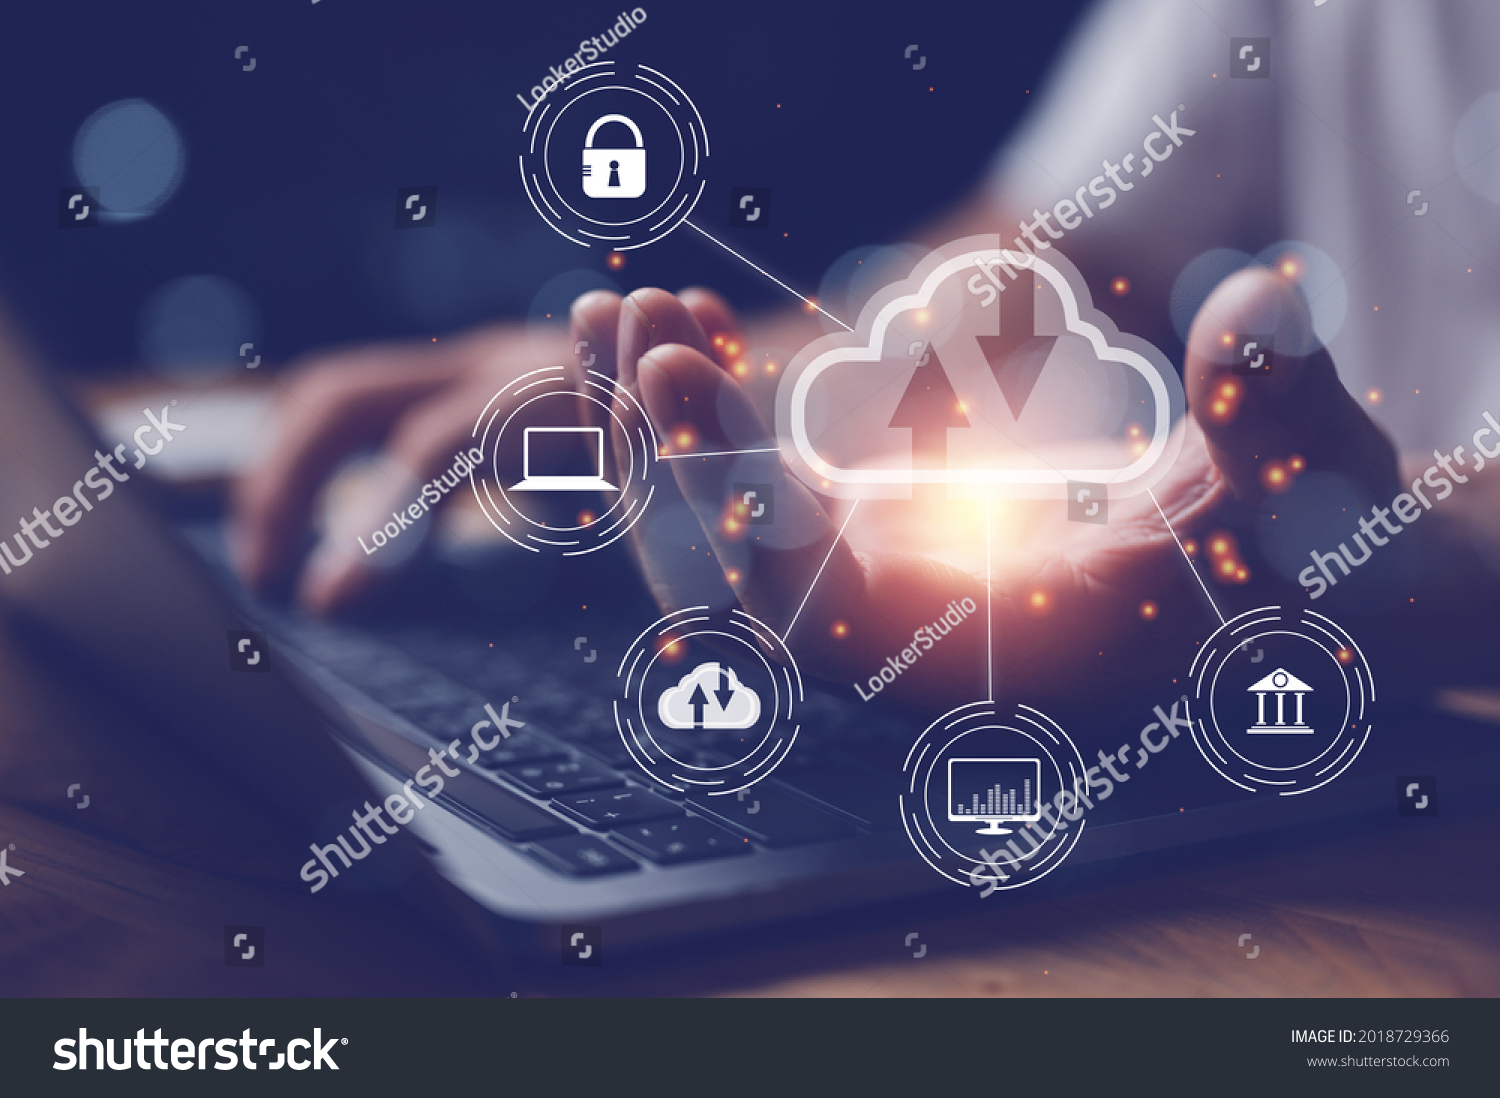 man use Laptop with cloud computing diagram show on hand. Cloud technology. Data storage. Networking and internet service concept. #2018729366